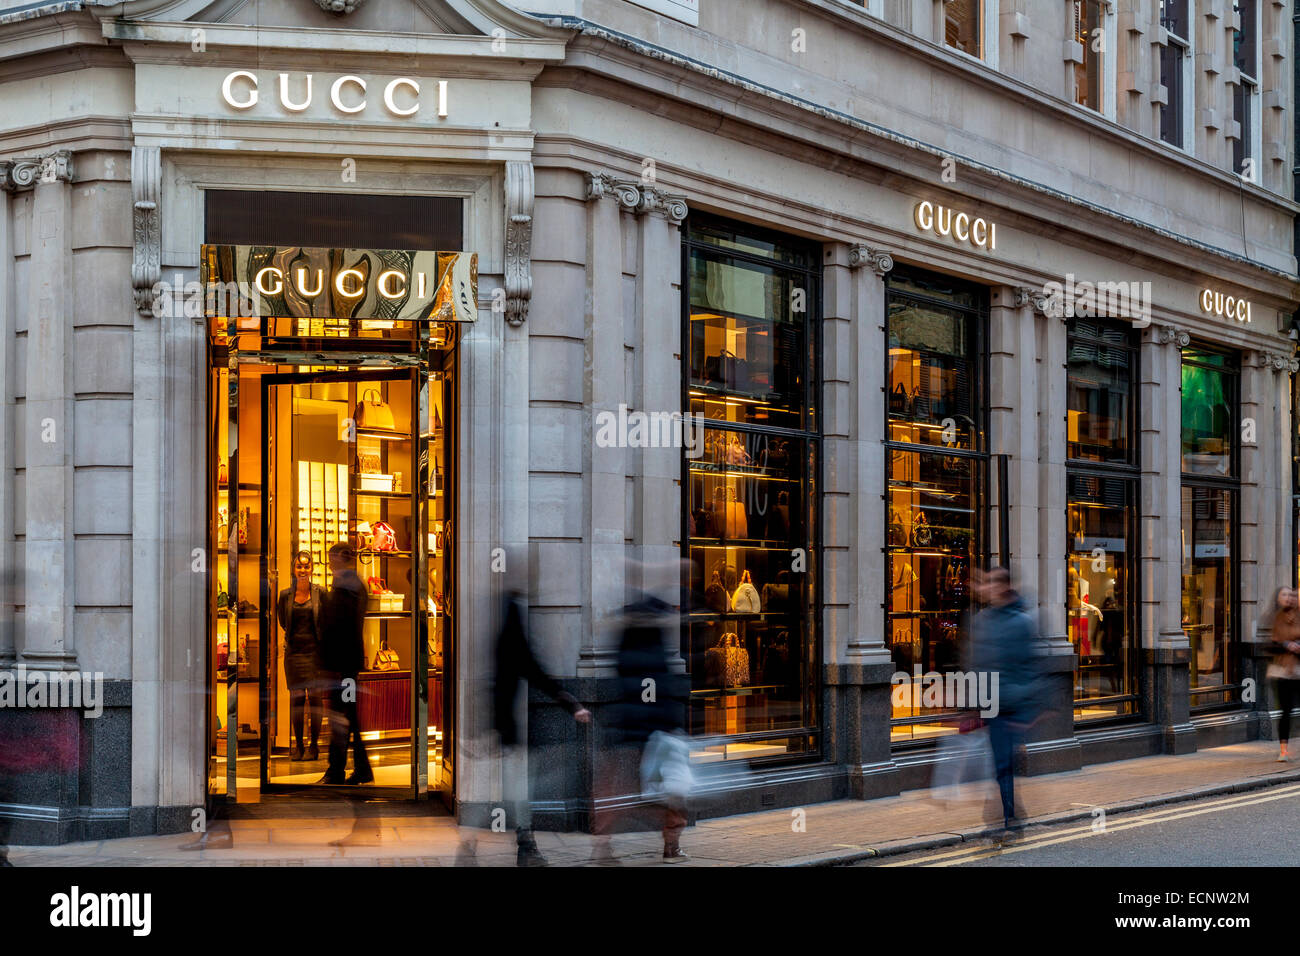 The Gucci Store In Old Bond Street, London, England Stock Photo: 76698012 - Alamy